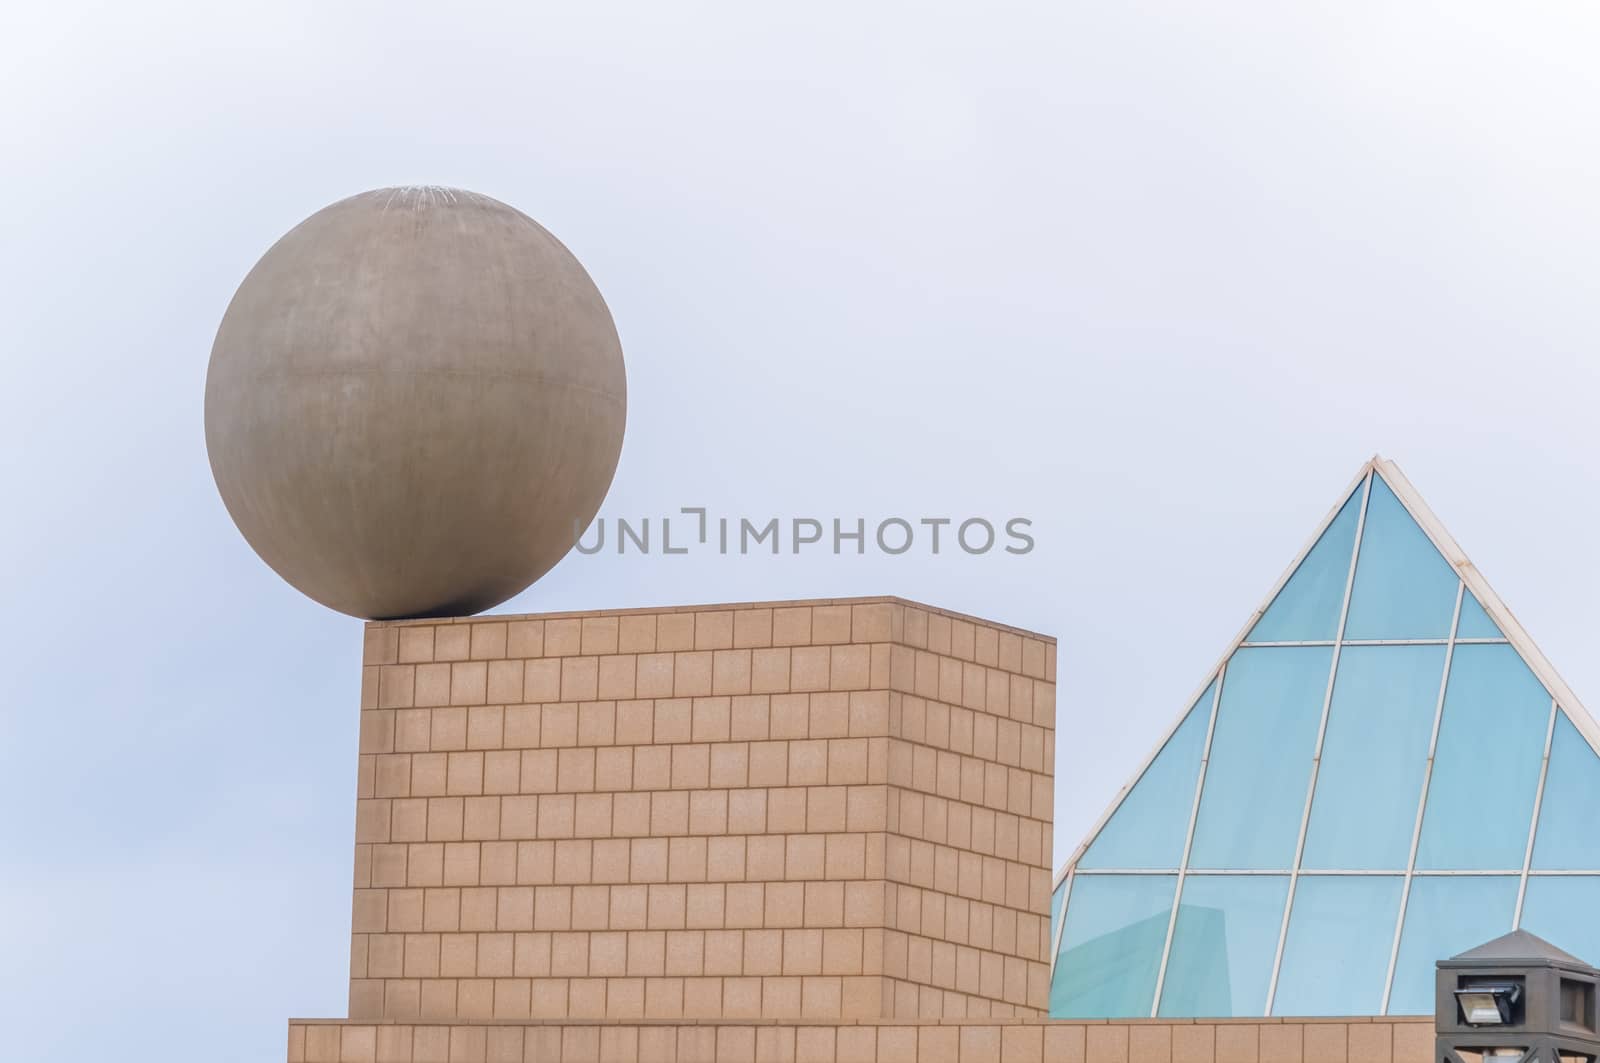 Barcelona, Spain - January 25, 2014: Detail of the Port Olimpic  Village in Barcelona with the big sphere sculpture designed by the famous architect Frank Gehry and erected in 1992. Spain. 